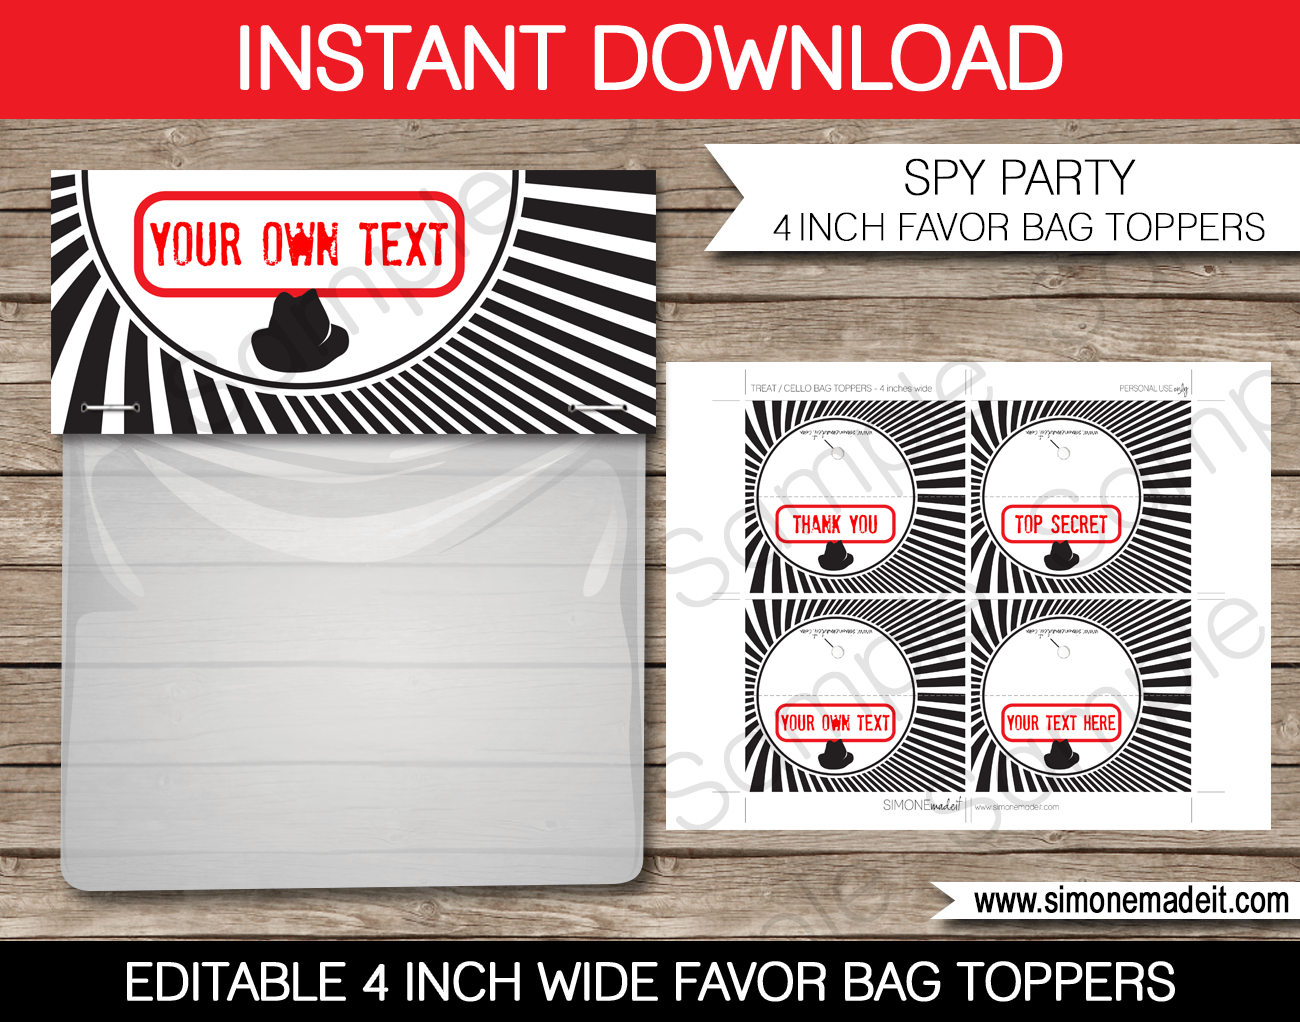 Spy Birthday Party Favor Bag Toppers | Birthday Party | Editable DIY Template | $3.00 INSTANT DOWNLOAD via SIMONEmadeit.com